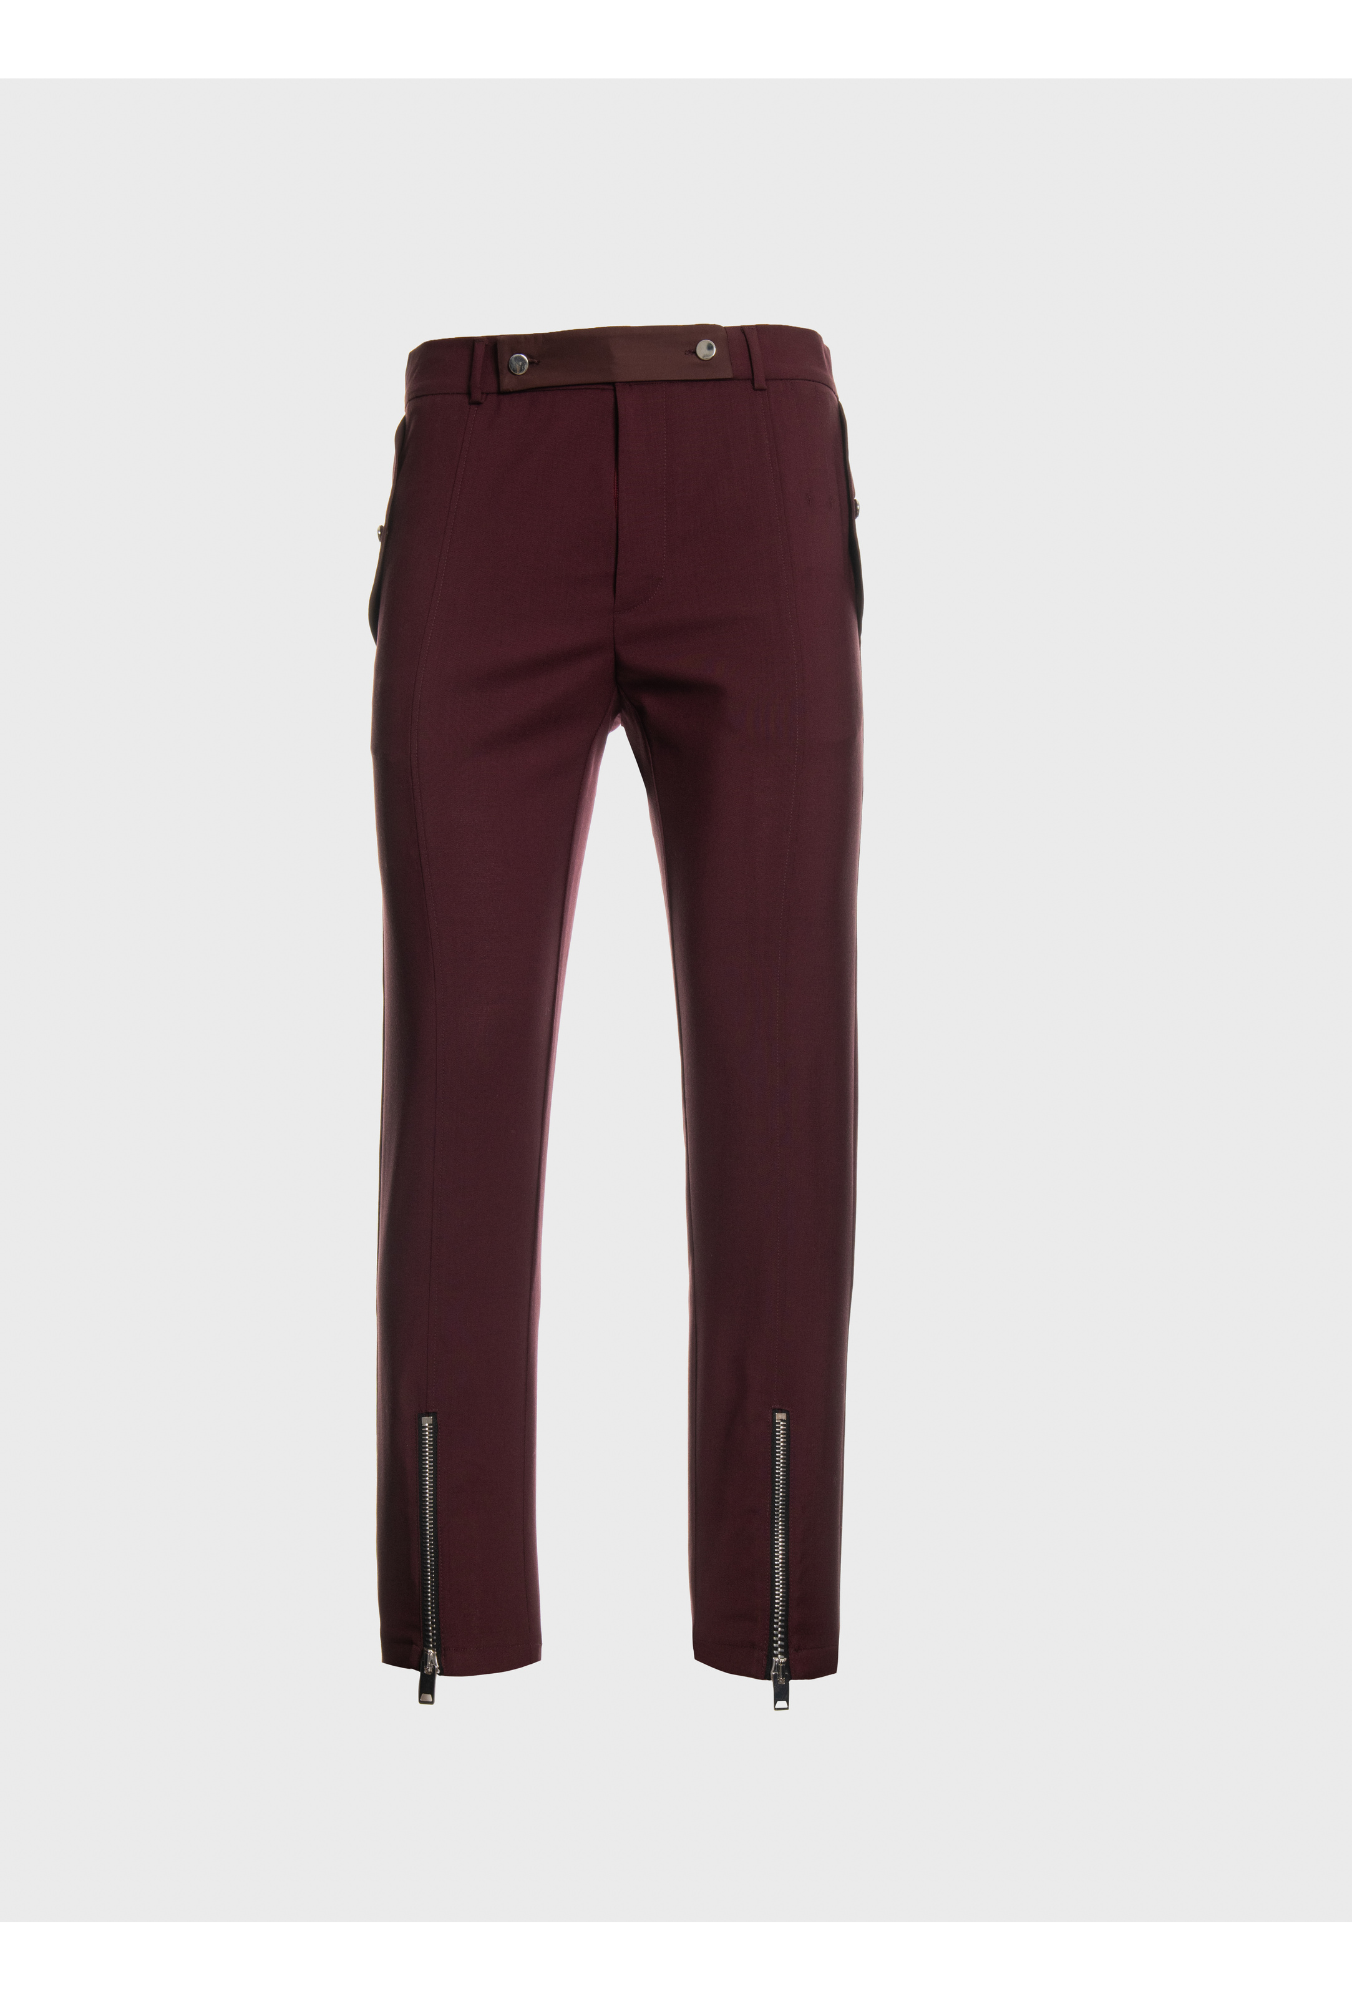 Classic pants with cuff'zips